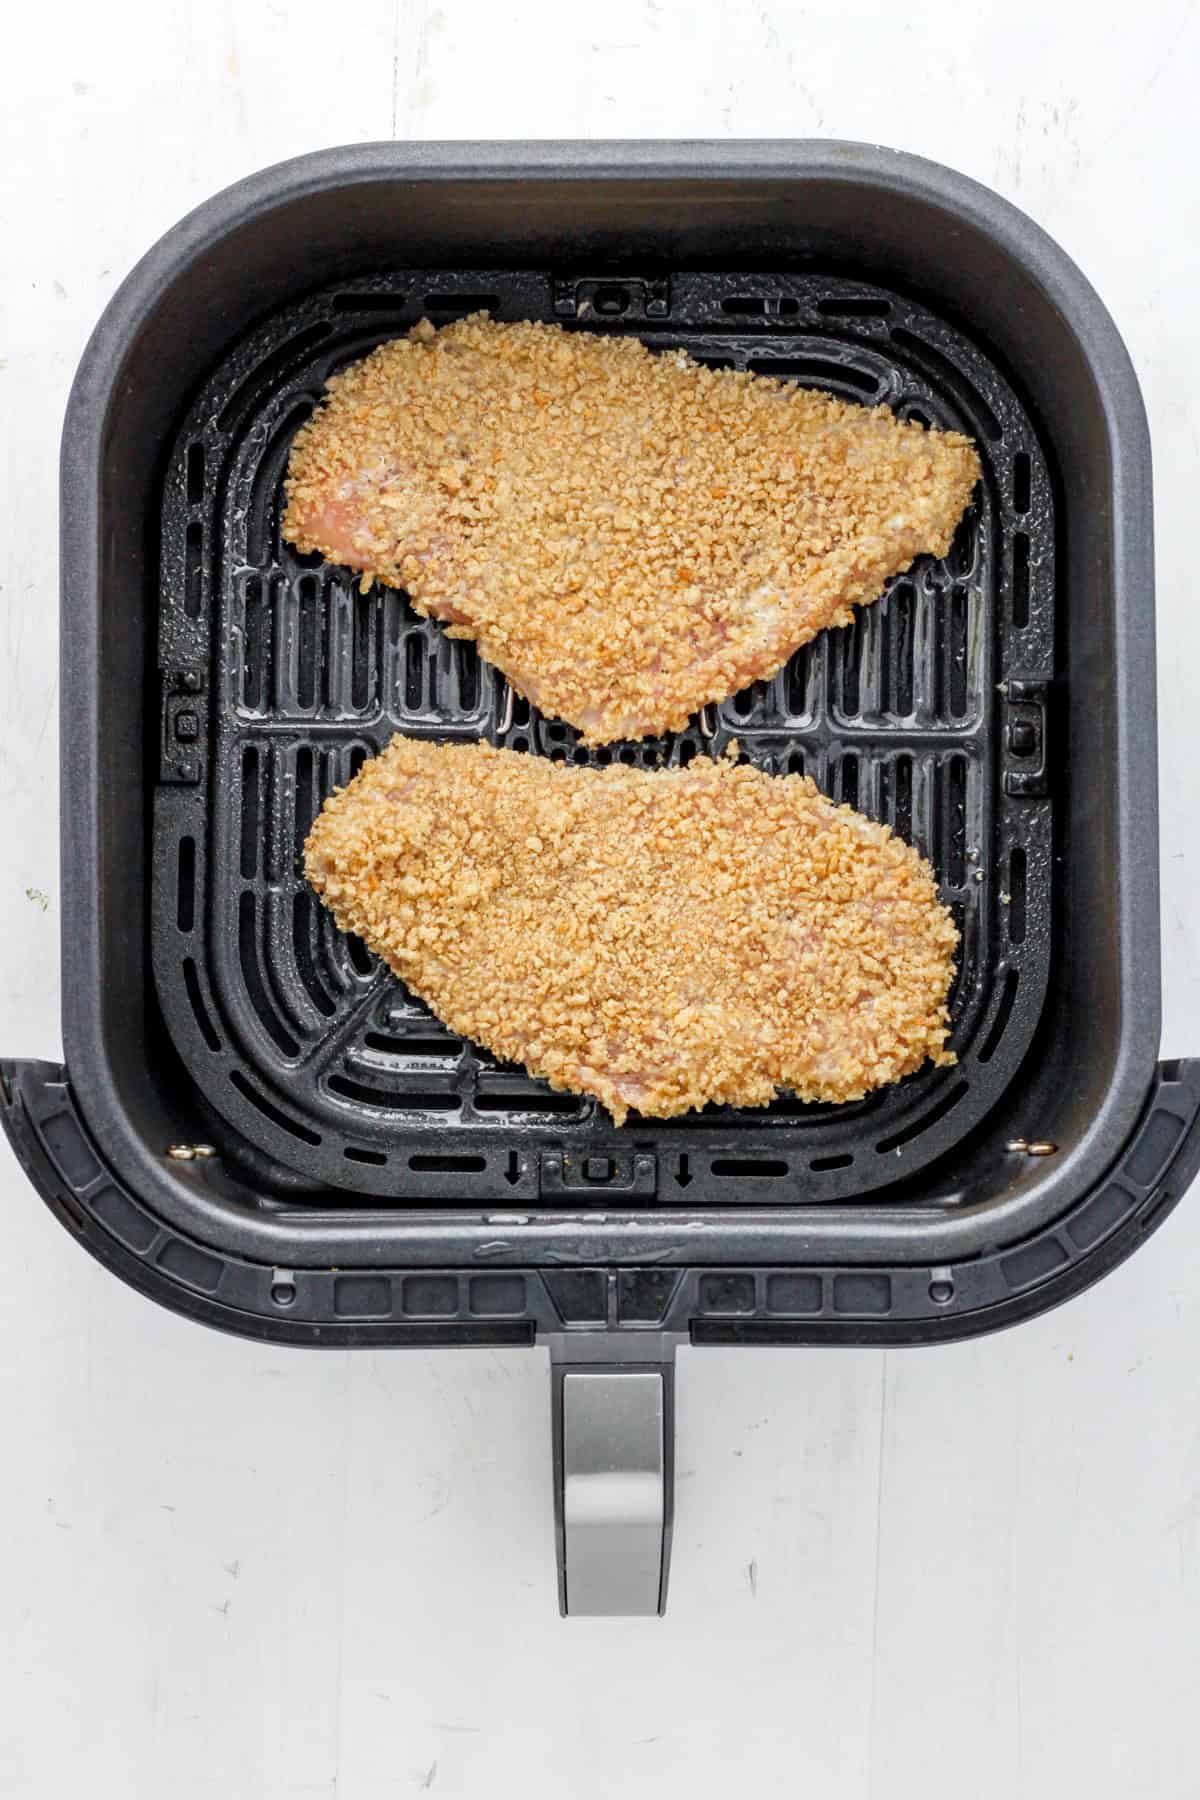 Breaded chicken cutlets uncooked in the basket of an air fryer.